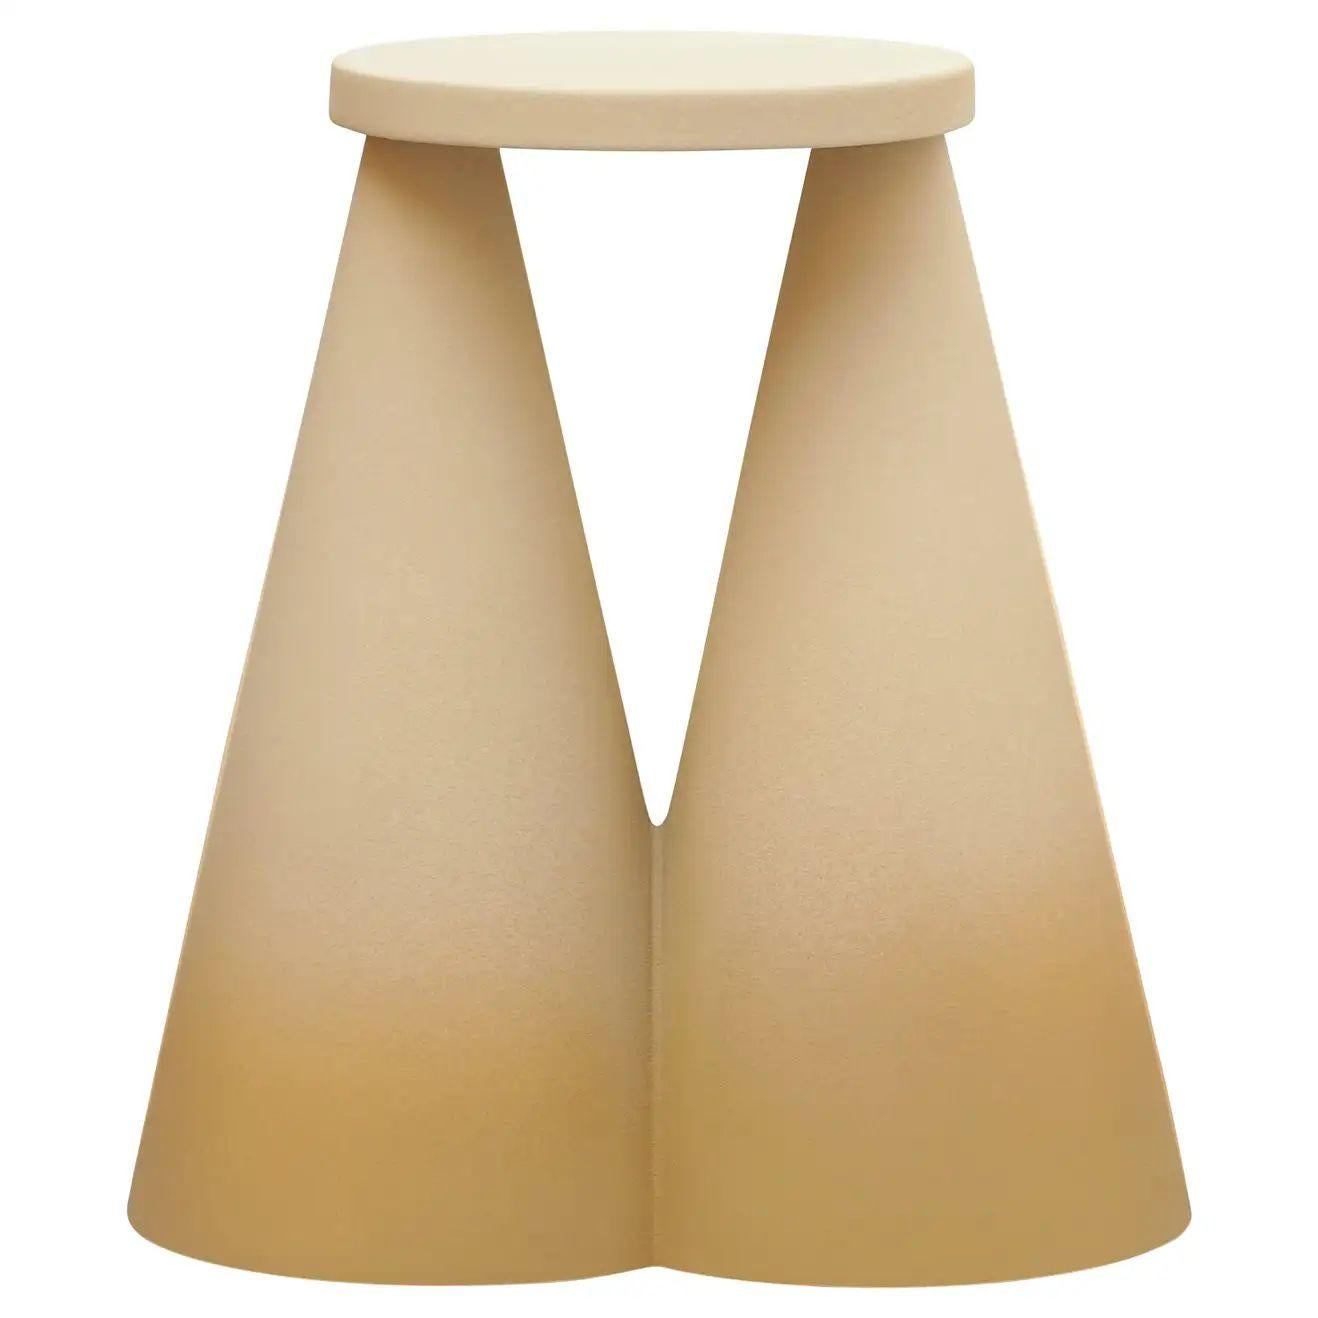 Pair of Isola Side Table by Cara Davide 5